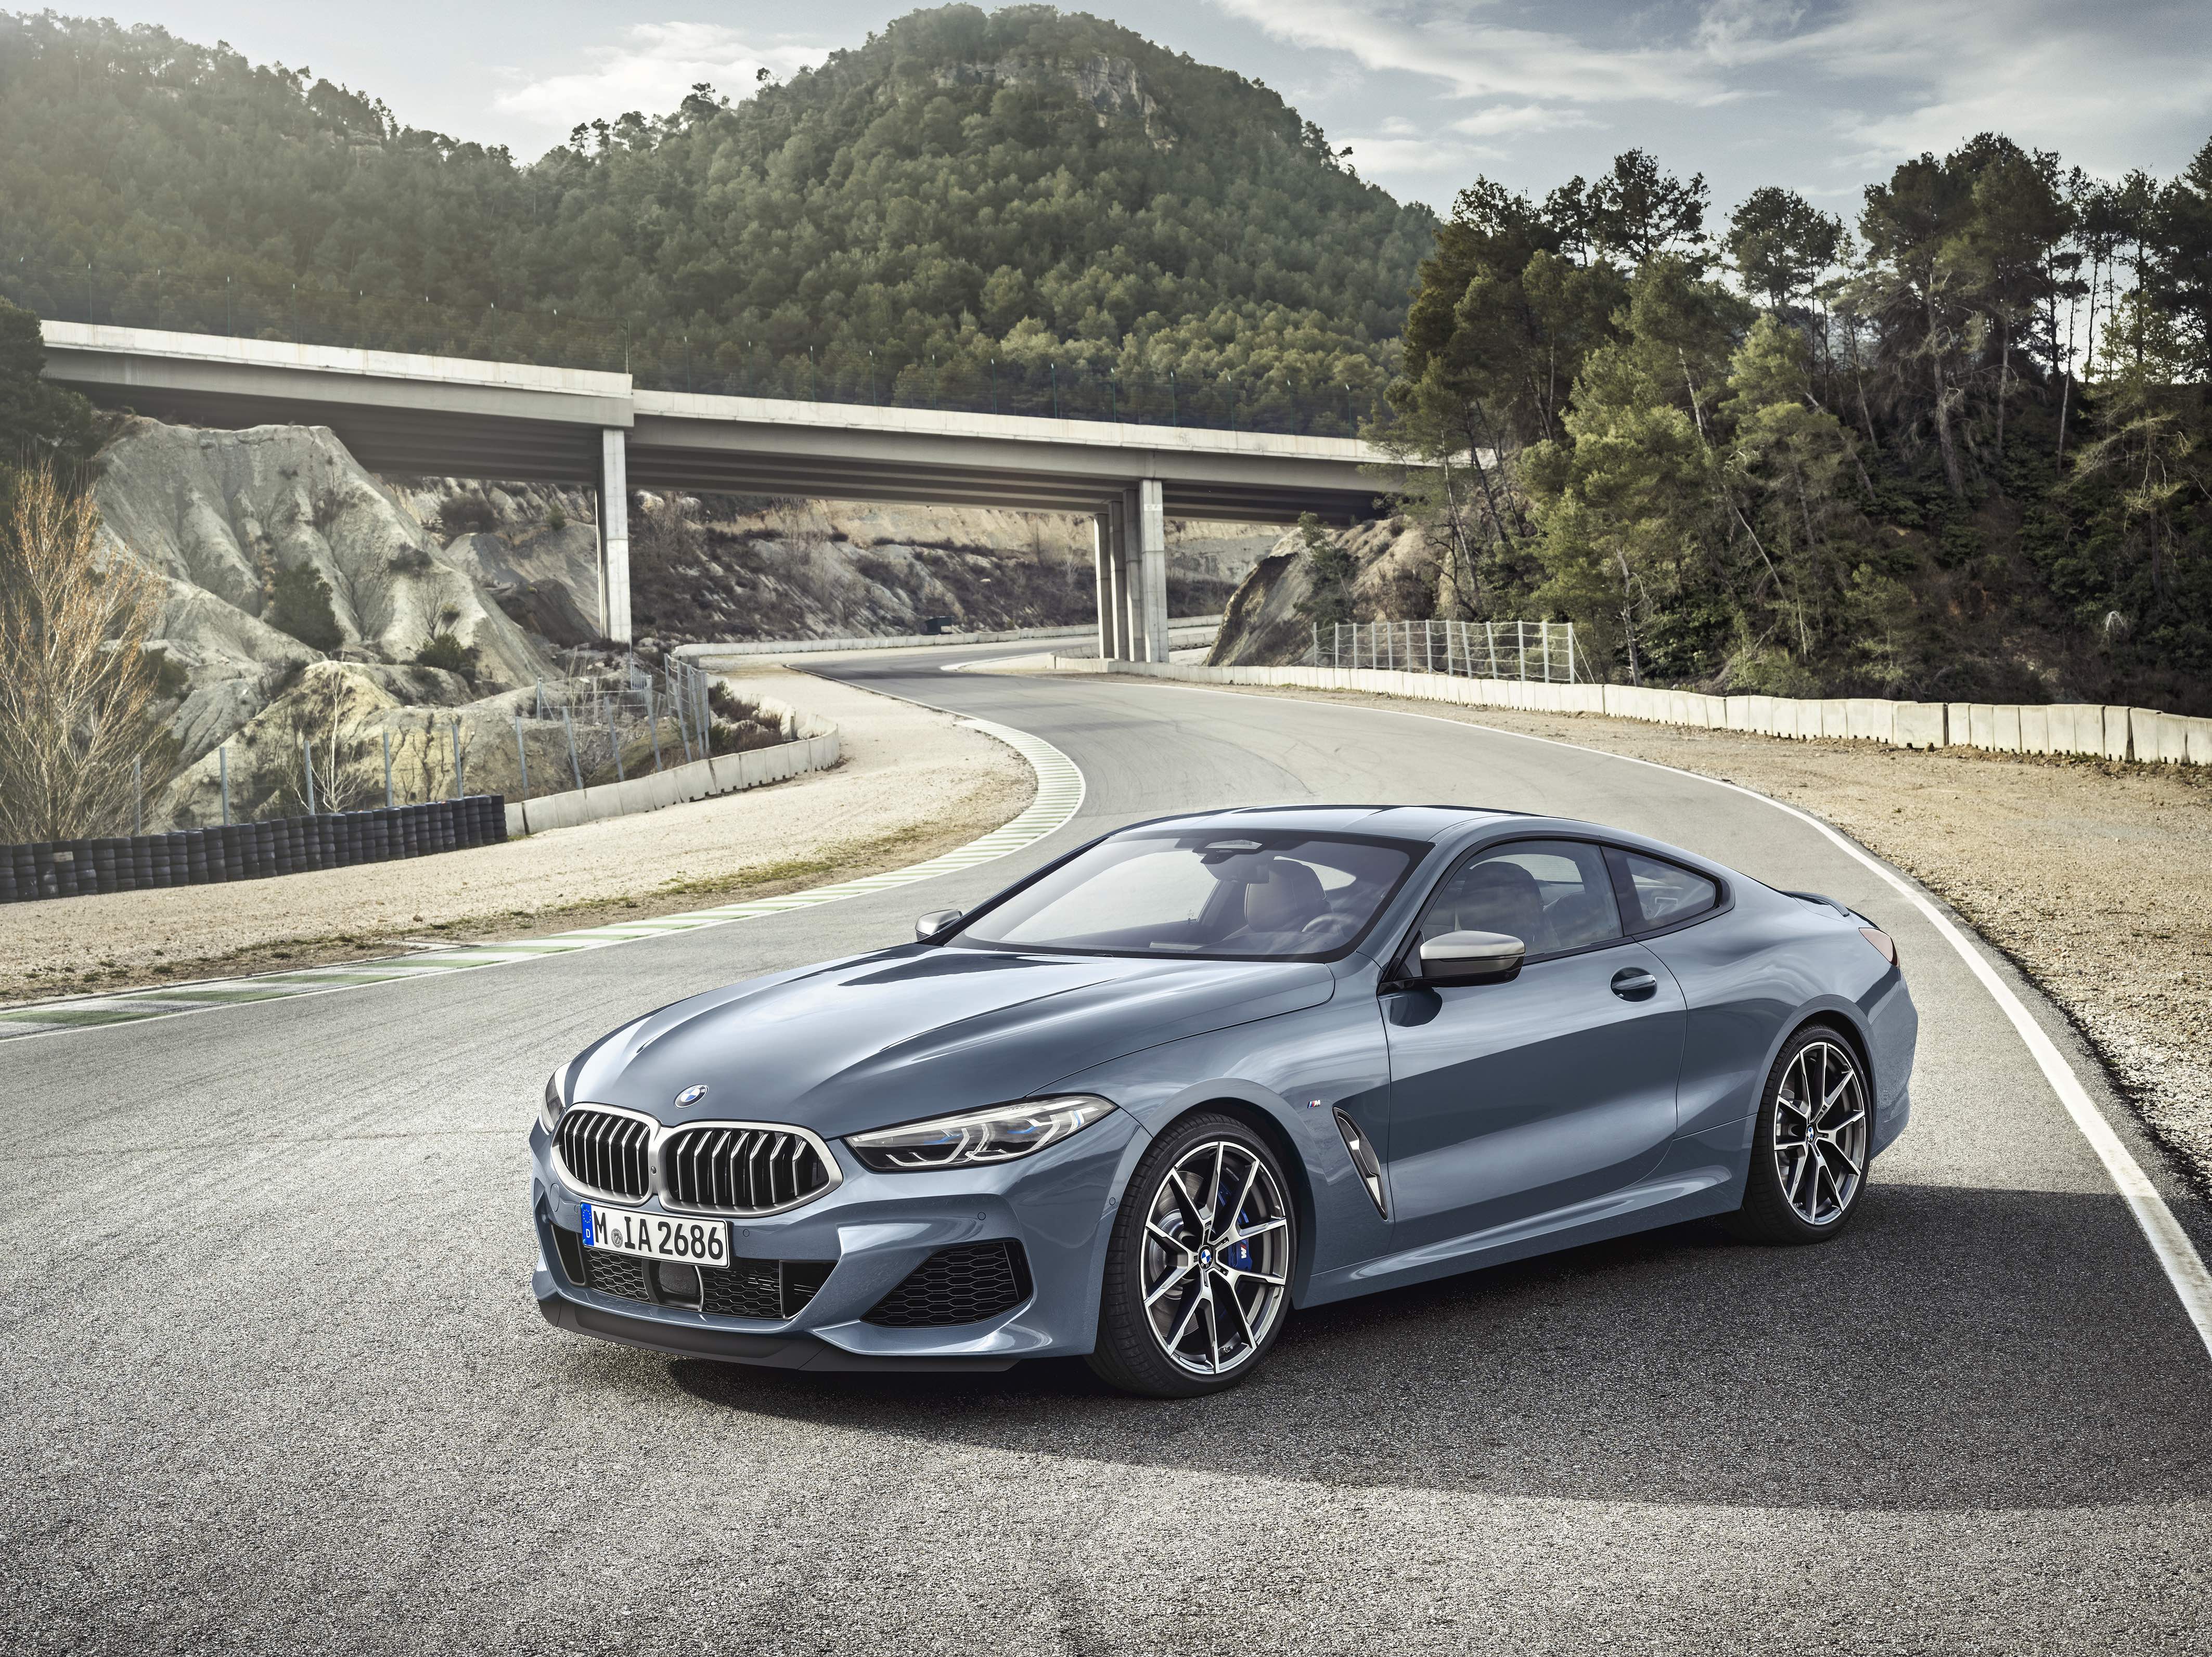 All-New BMW 8 Series Reveal